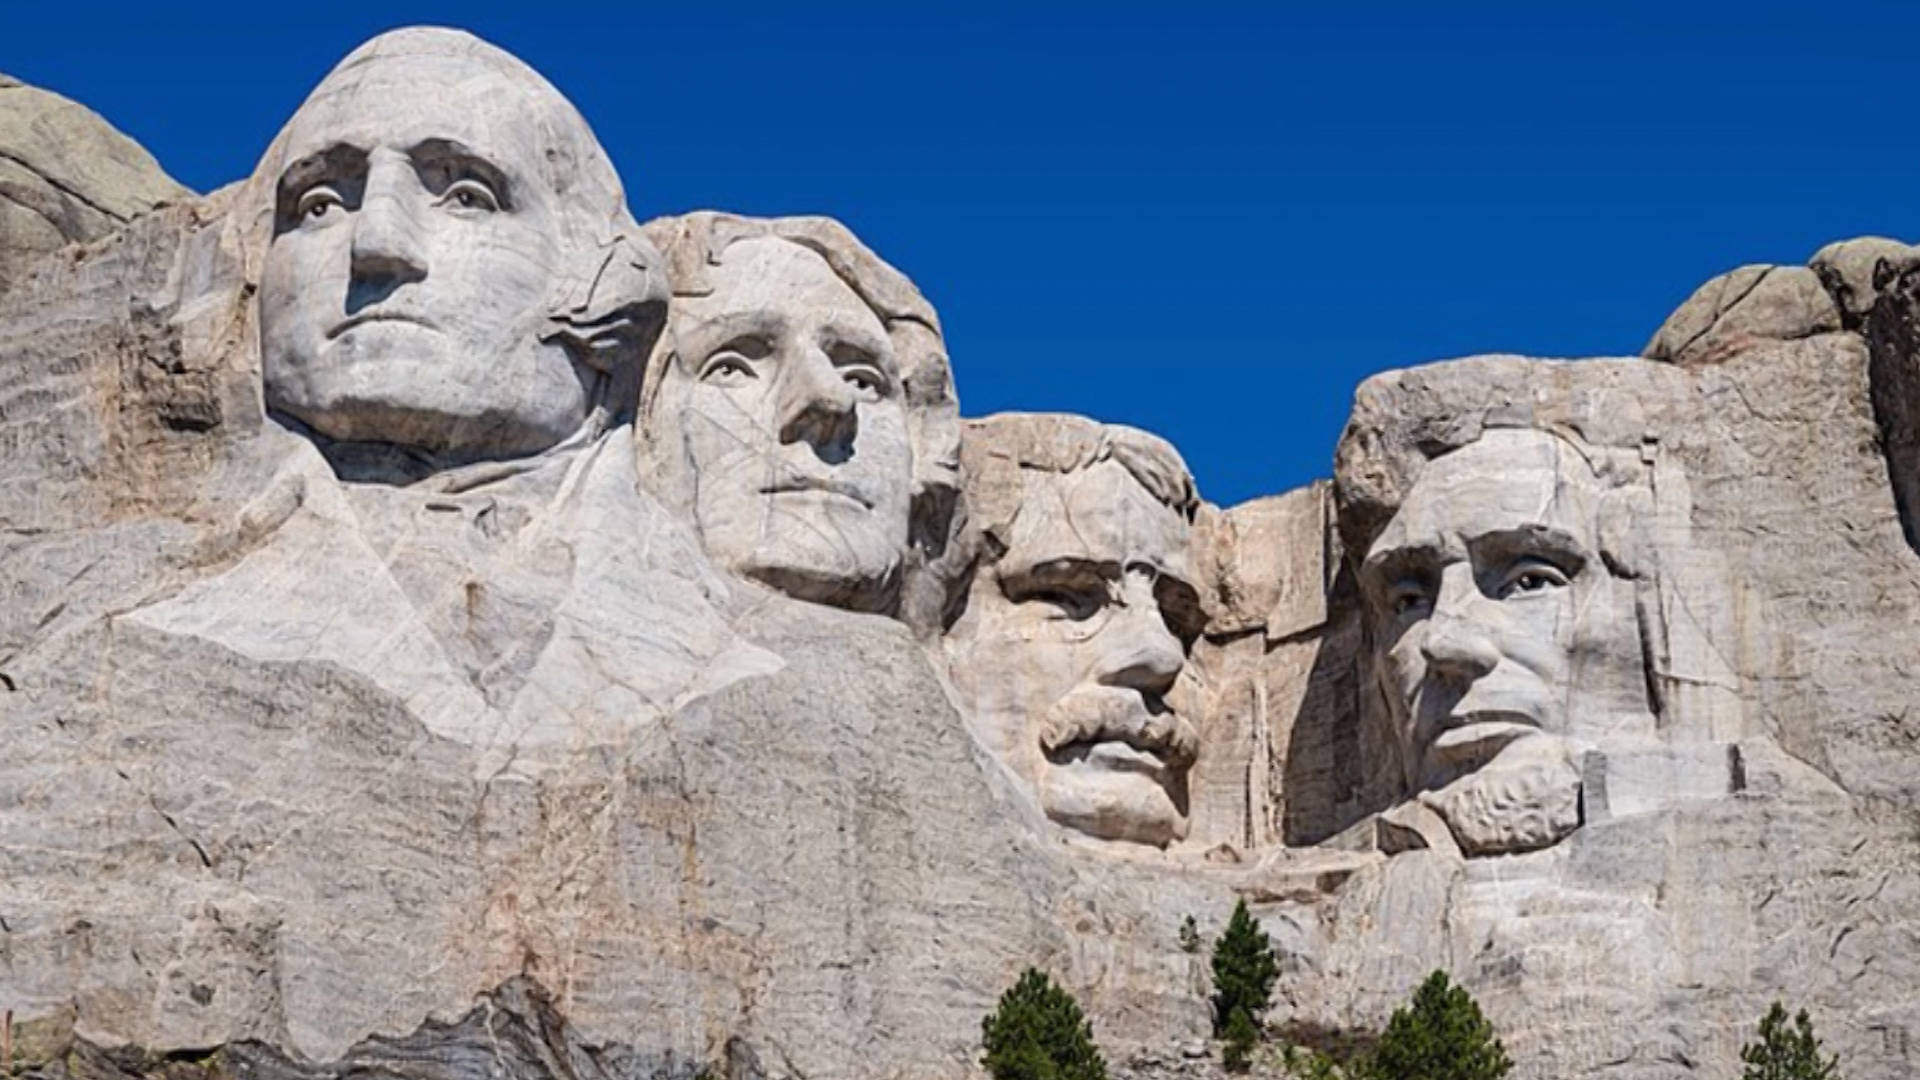 How many years did it take to make mount rushmore The Untold History Of Mount Rushmore A Kkk Sympathizer Built Monument On Sacred Lakota Land Democracy Now